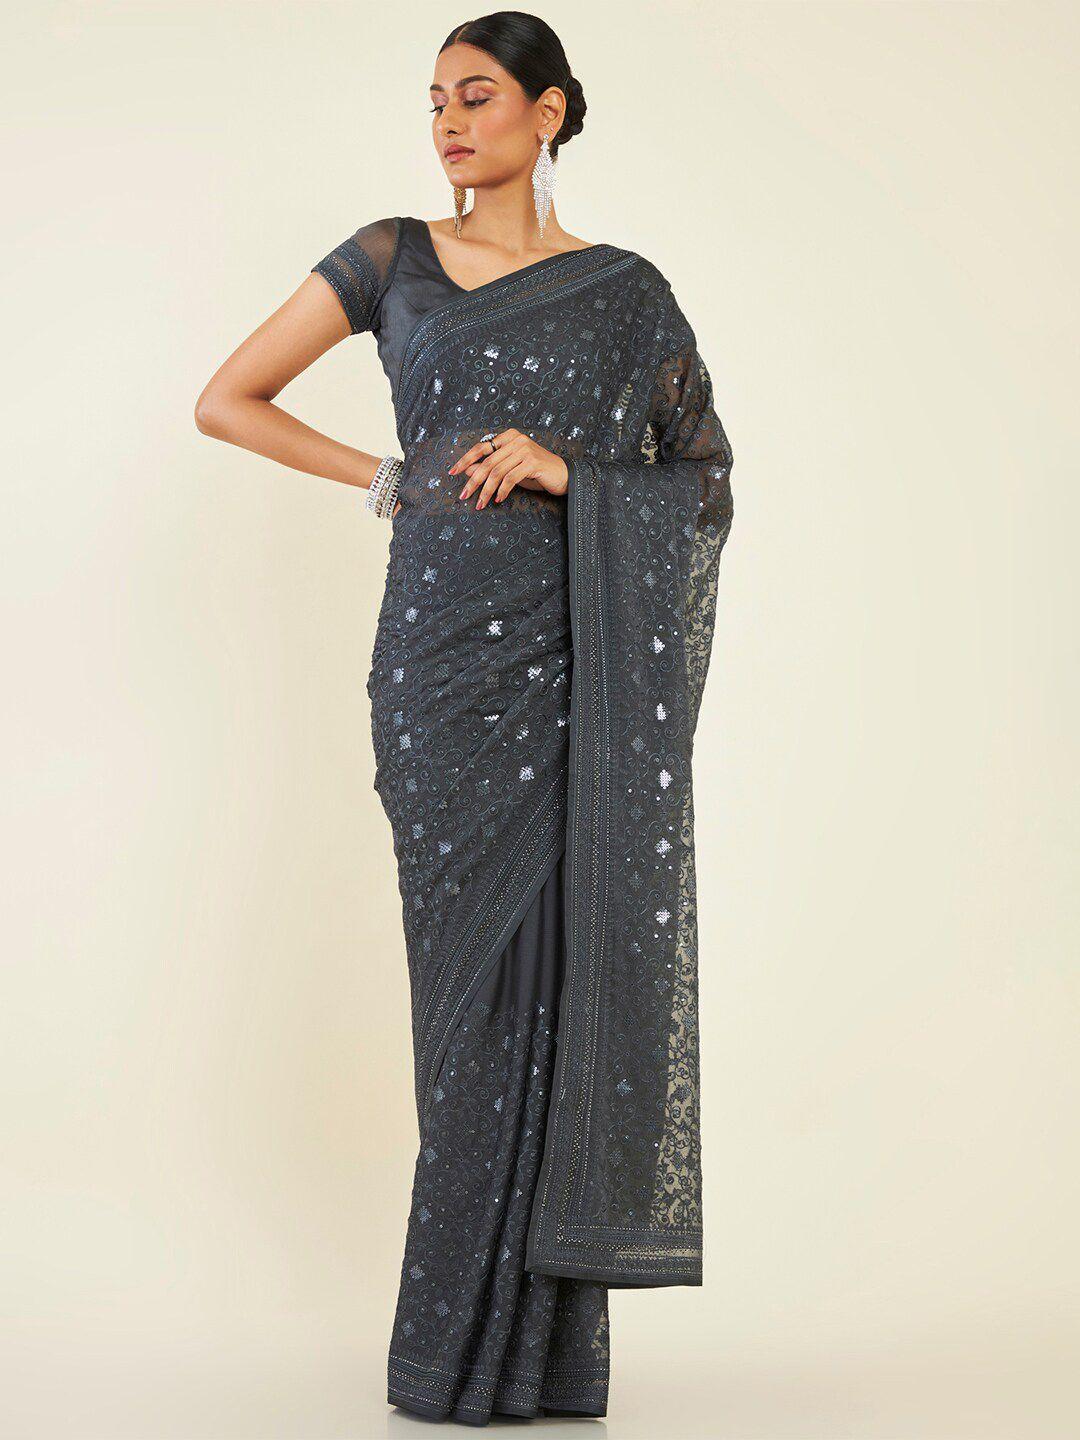 soch grey & silver-toned embellished beads and stones pure chiffon saree